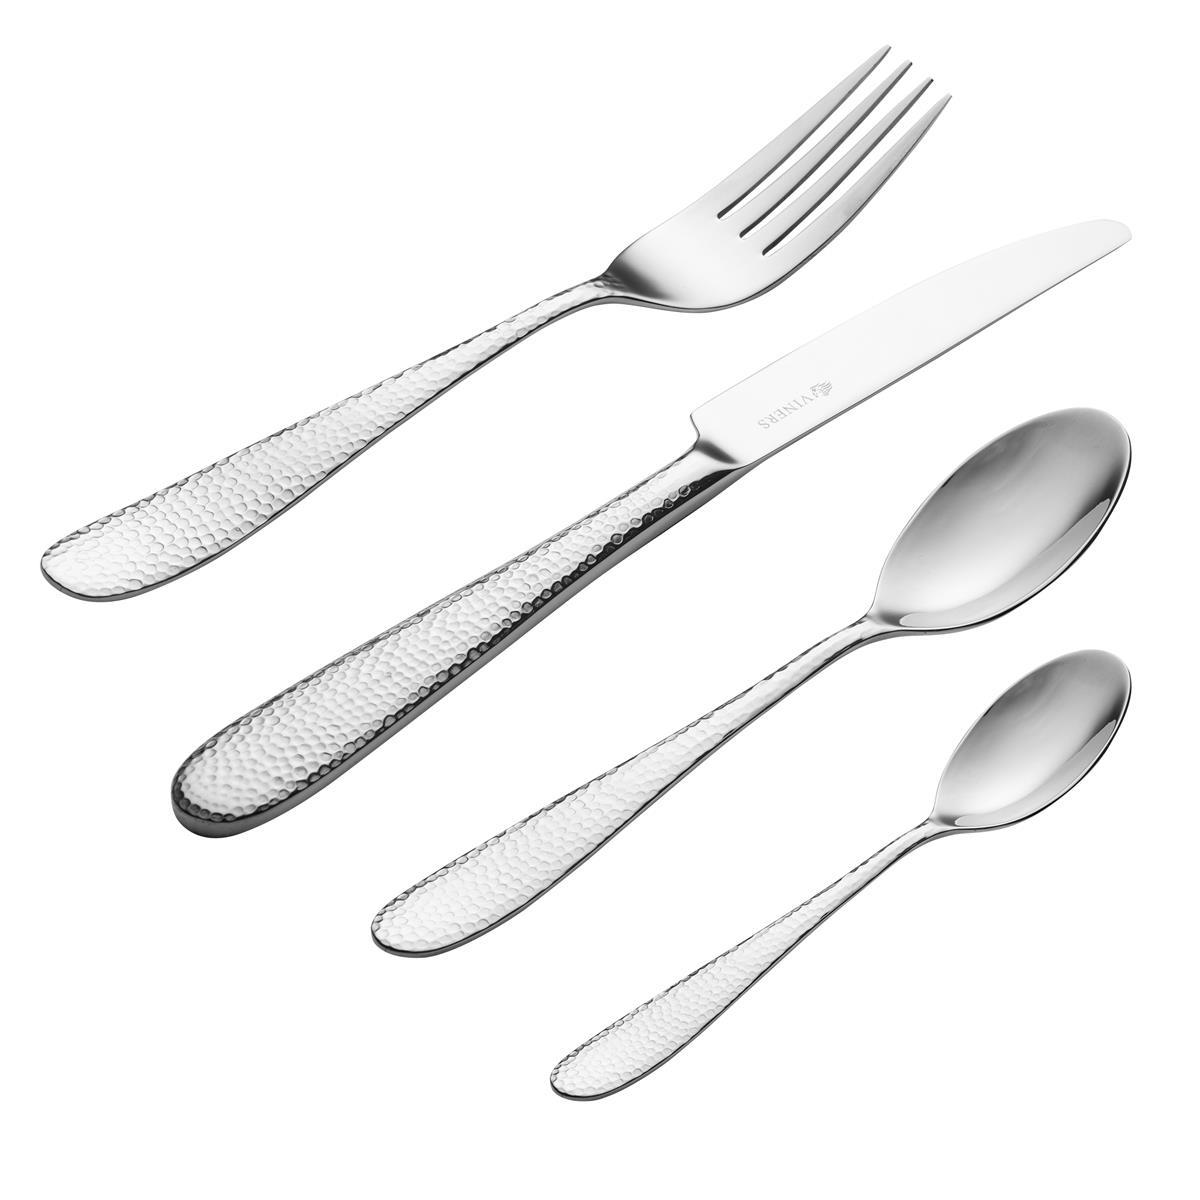 What material is the Viners Glamour Cutlery Set made of?